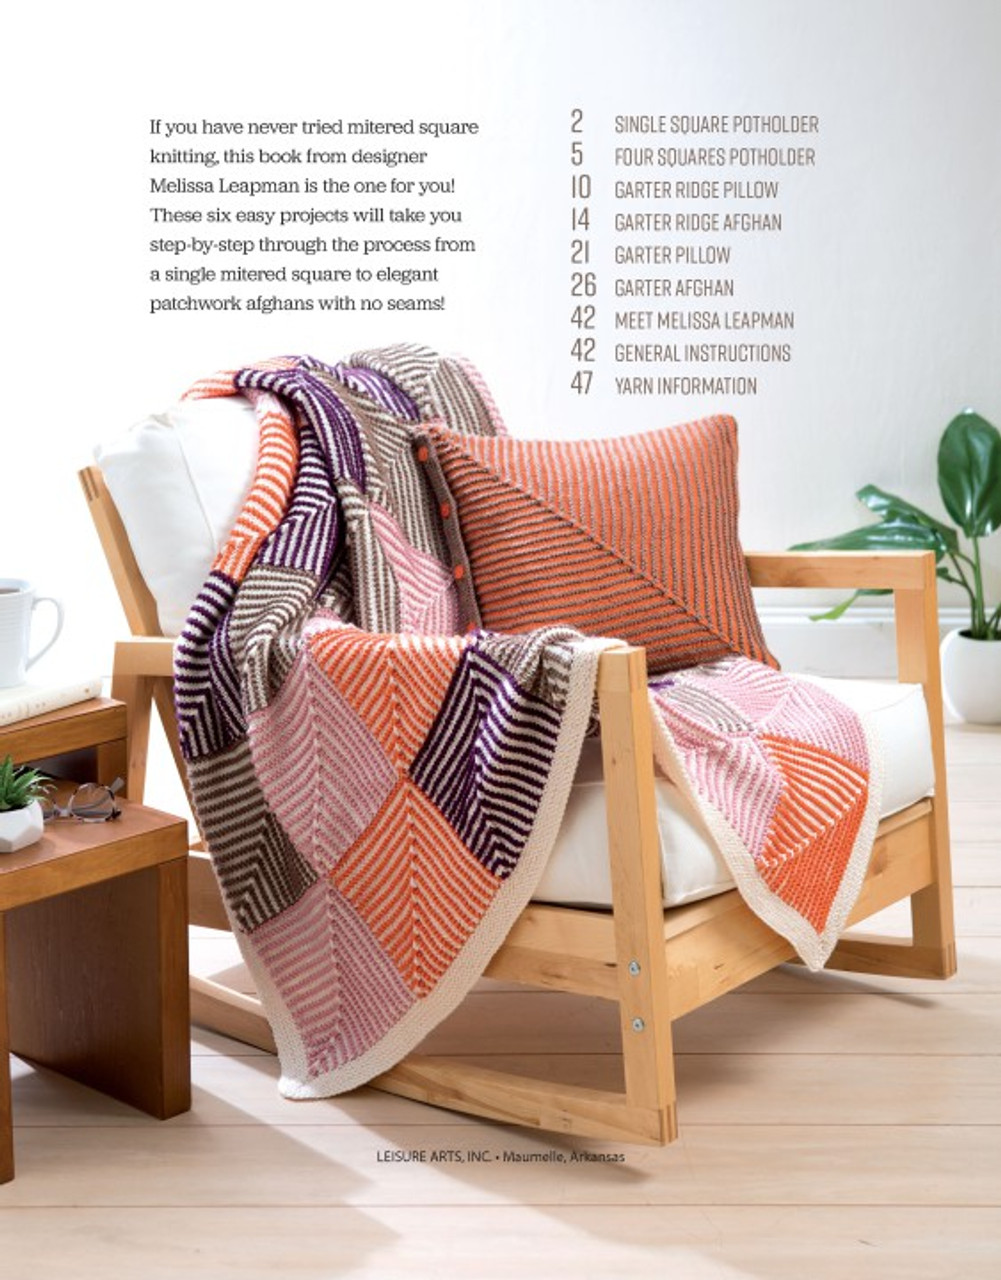 3 good reasons to upsize your Mitered Square blanket — Louise